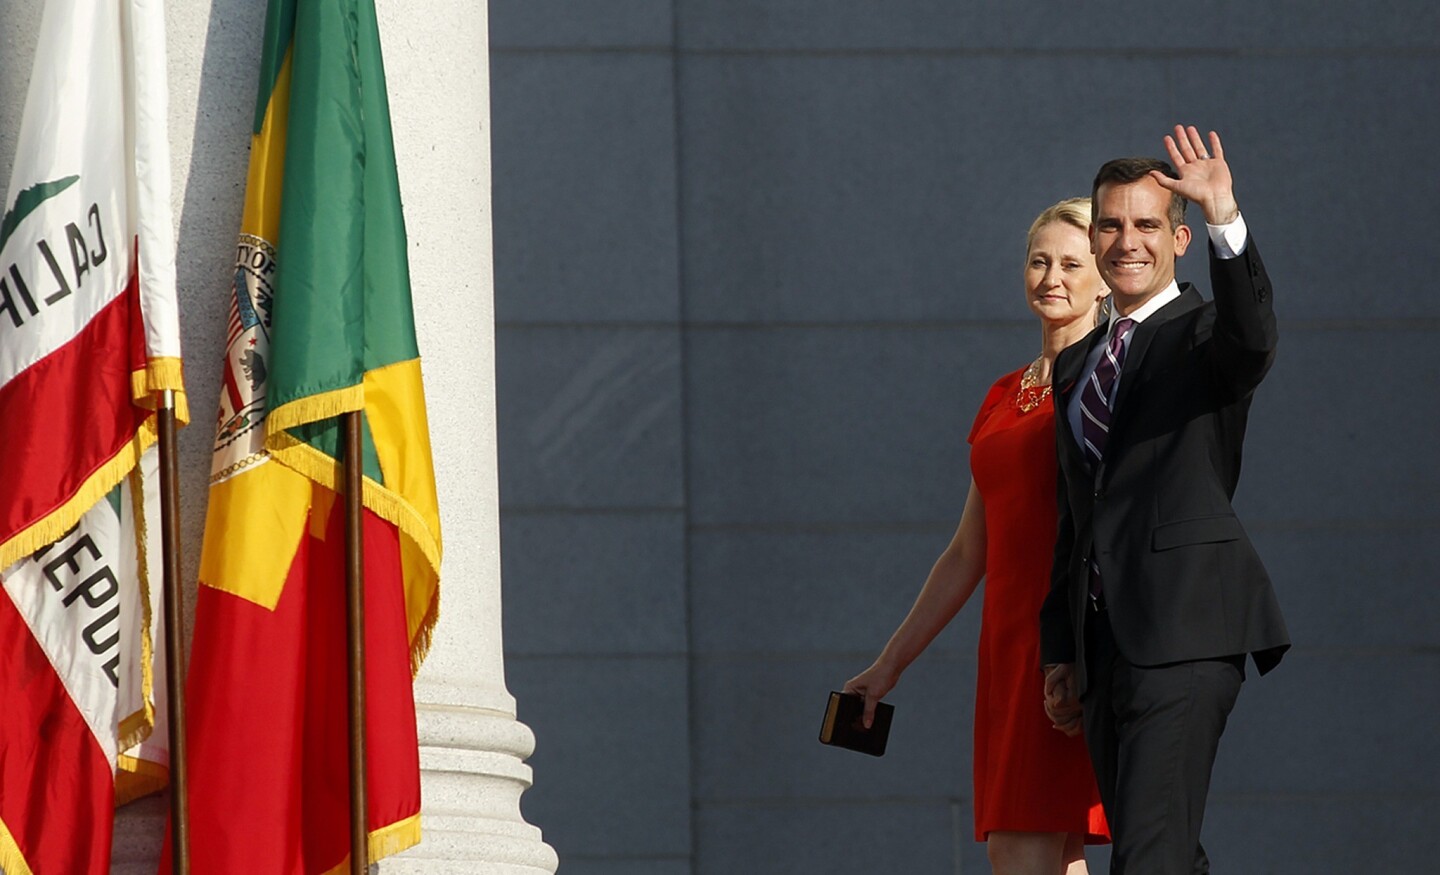 Mayor Eric Garcetti and his wife, Amy Wakeland, are introduced during his inauguration ceremony on the steps of City Hall in downtown Los Angeles.